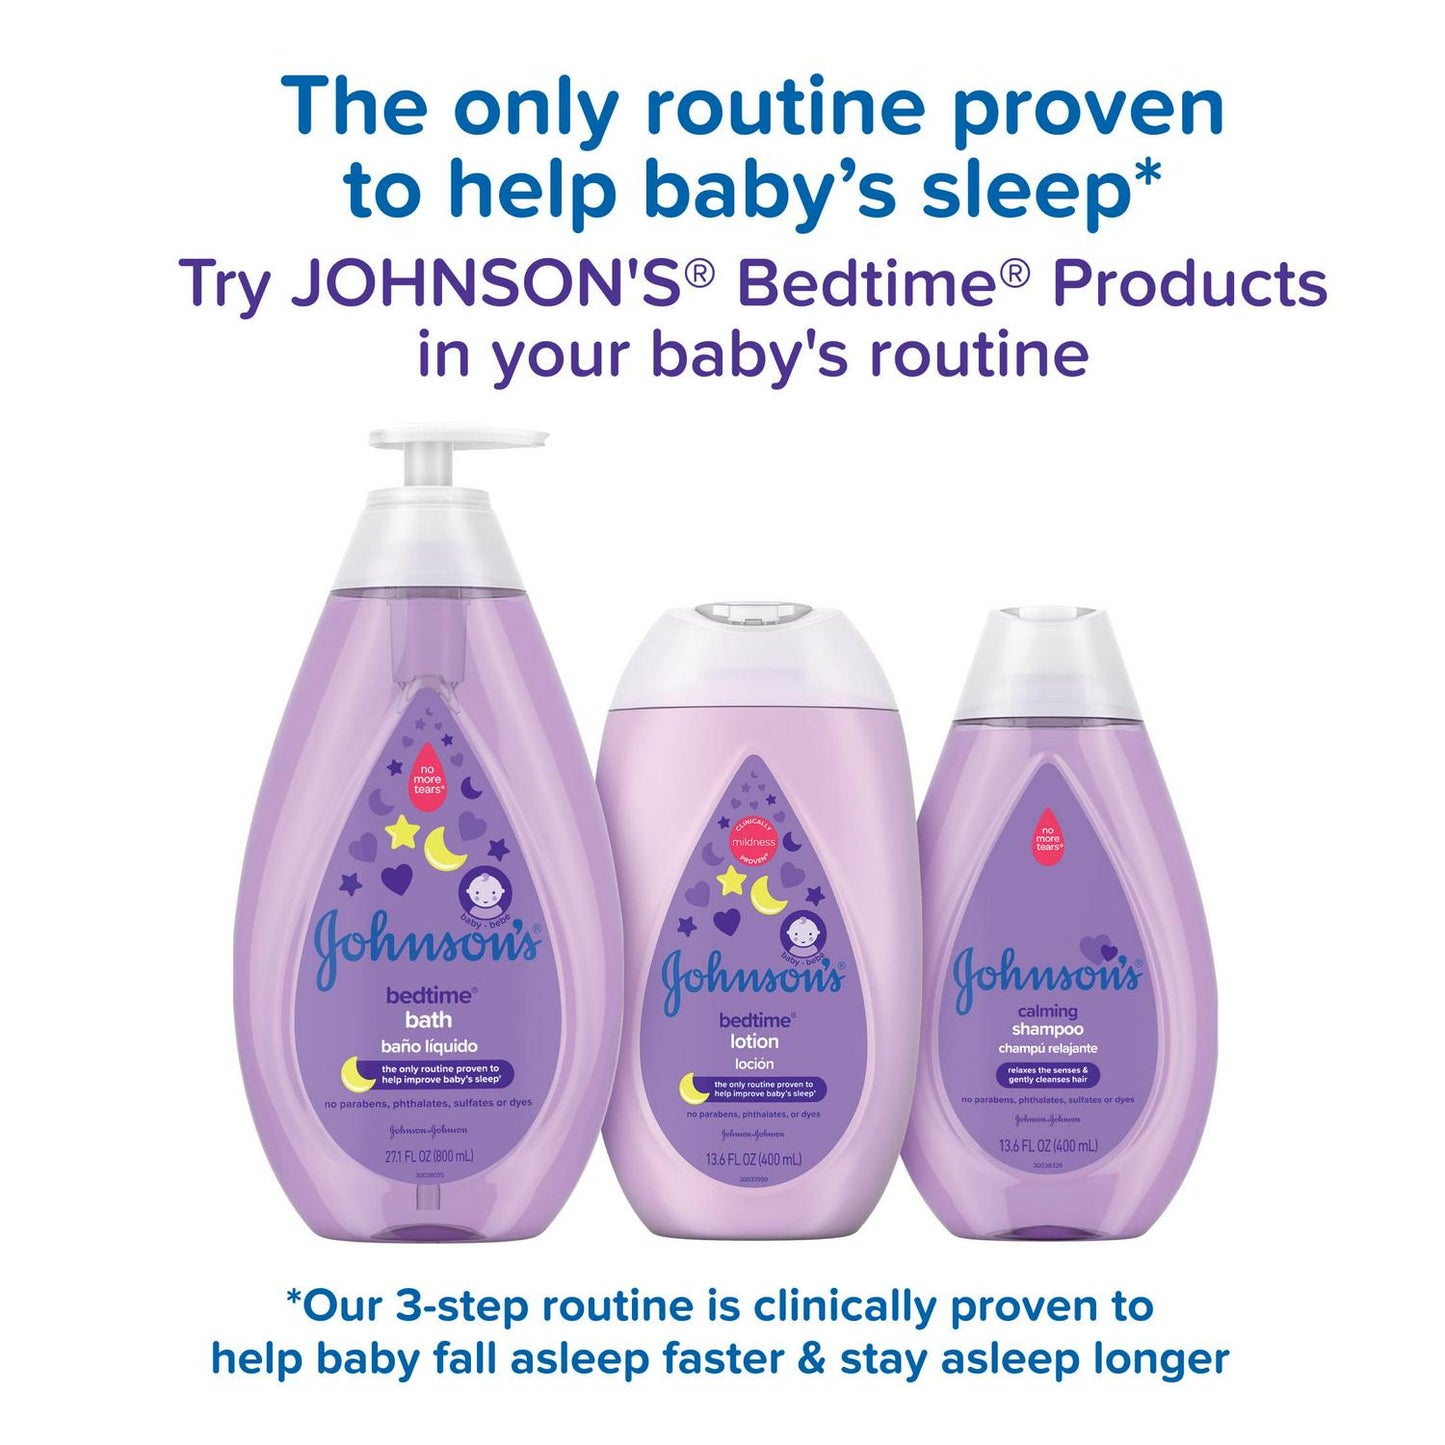 Johnson's Sleepy Time Relaxing Baby Gift Set with Baby Shampoo, Wash and Lotion, 4 full-size items